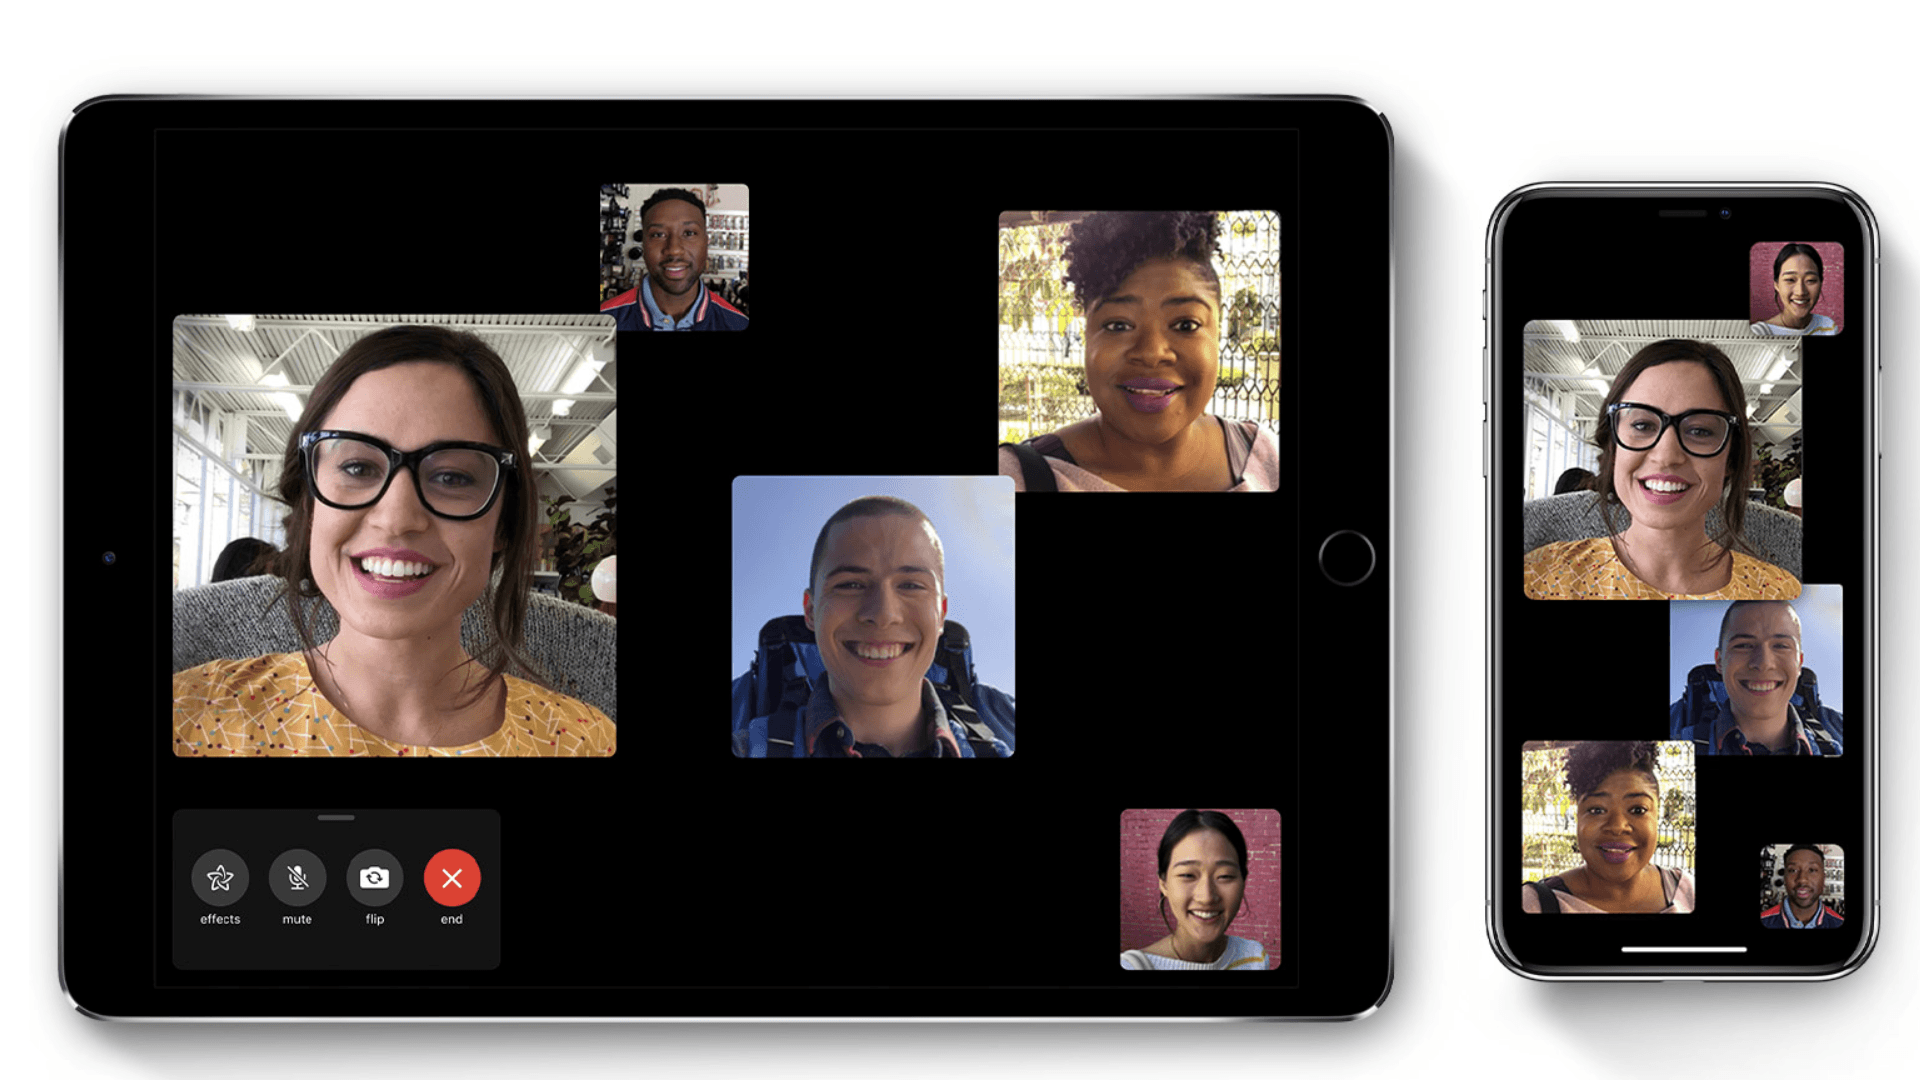 How to join a FaceTime call without iPhone